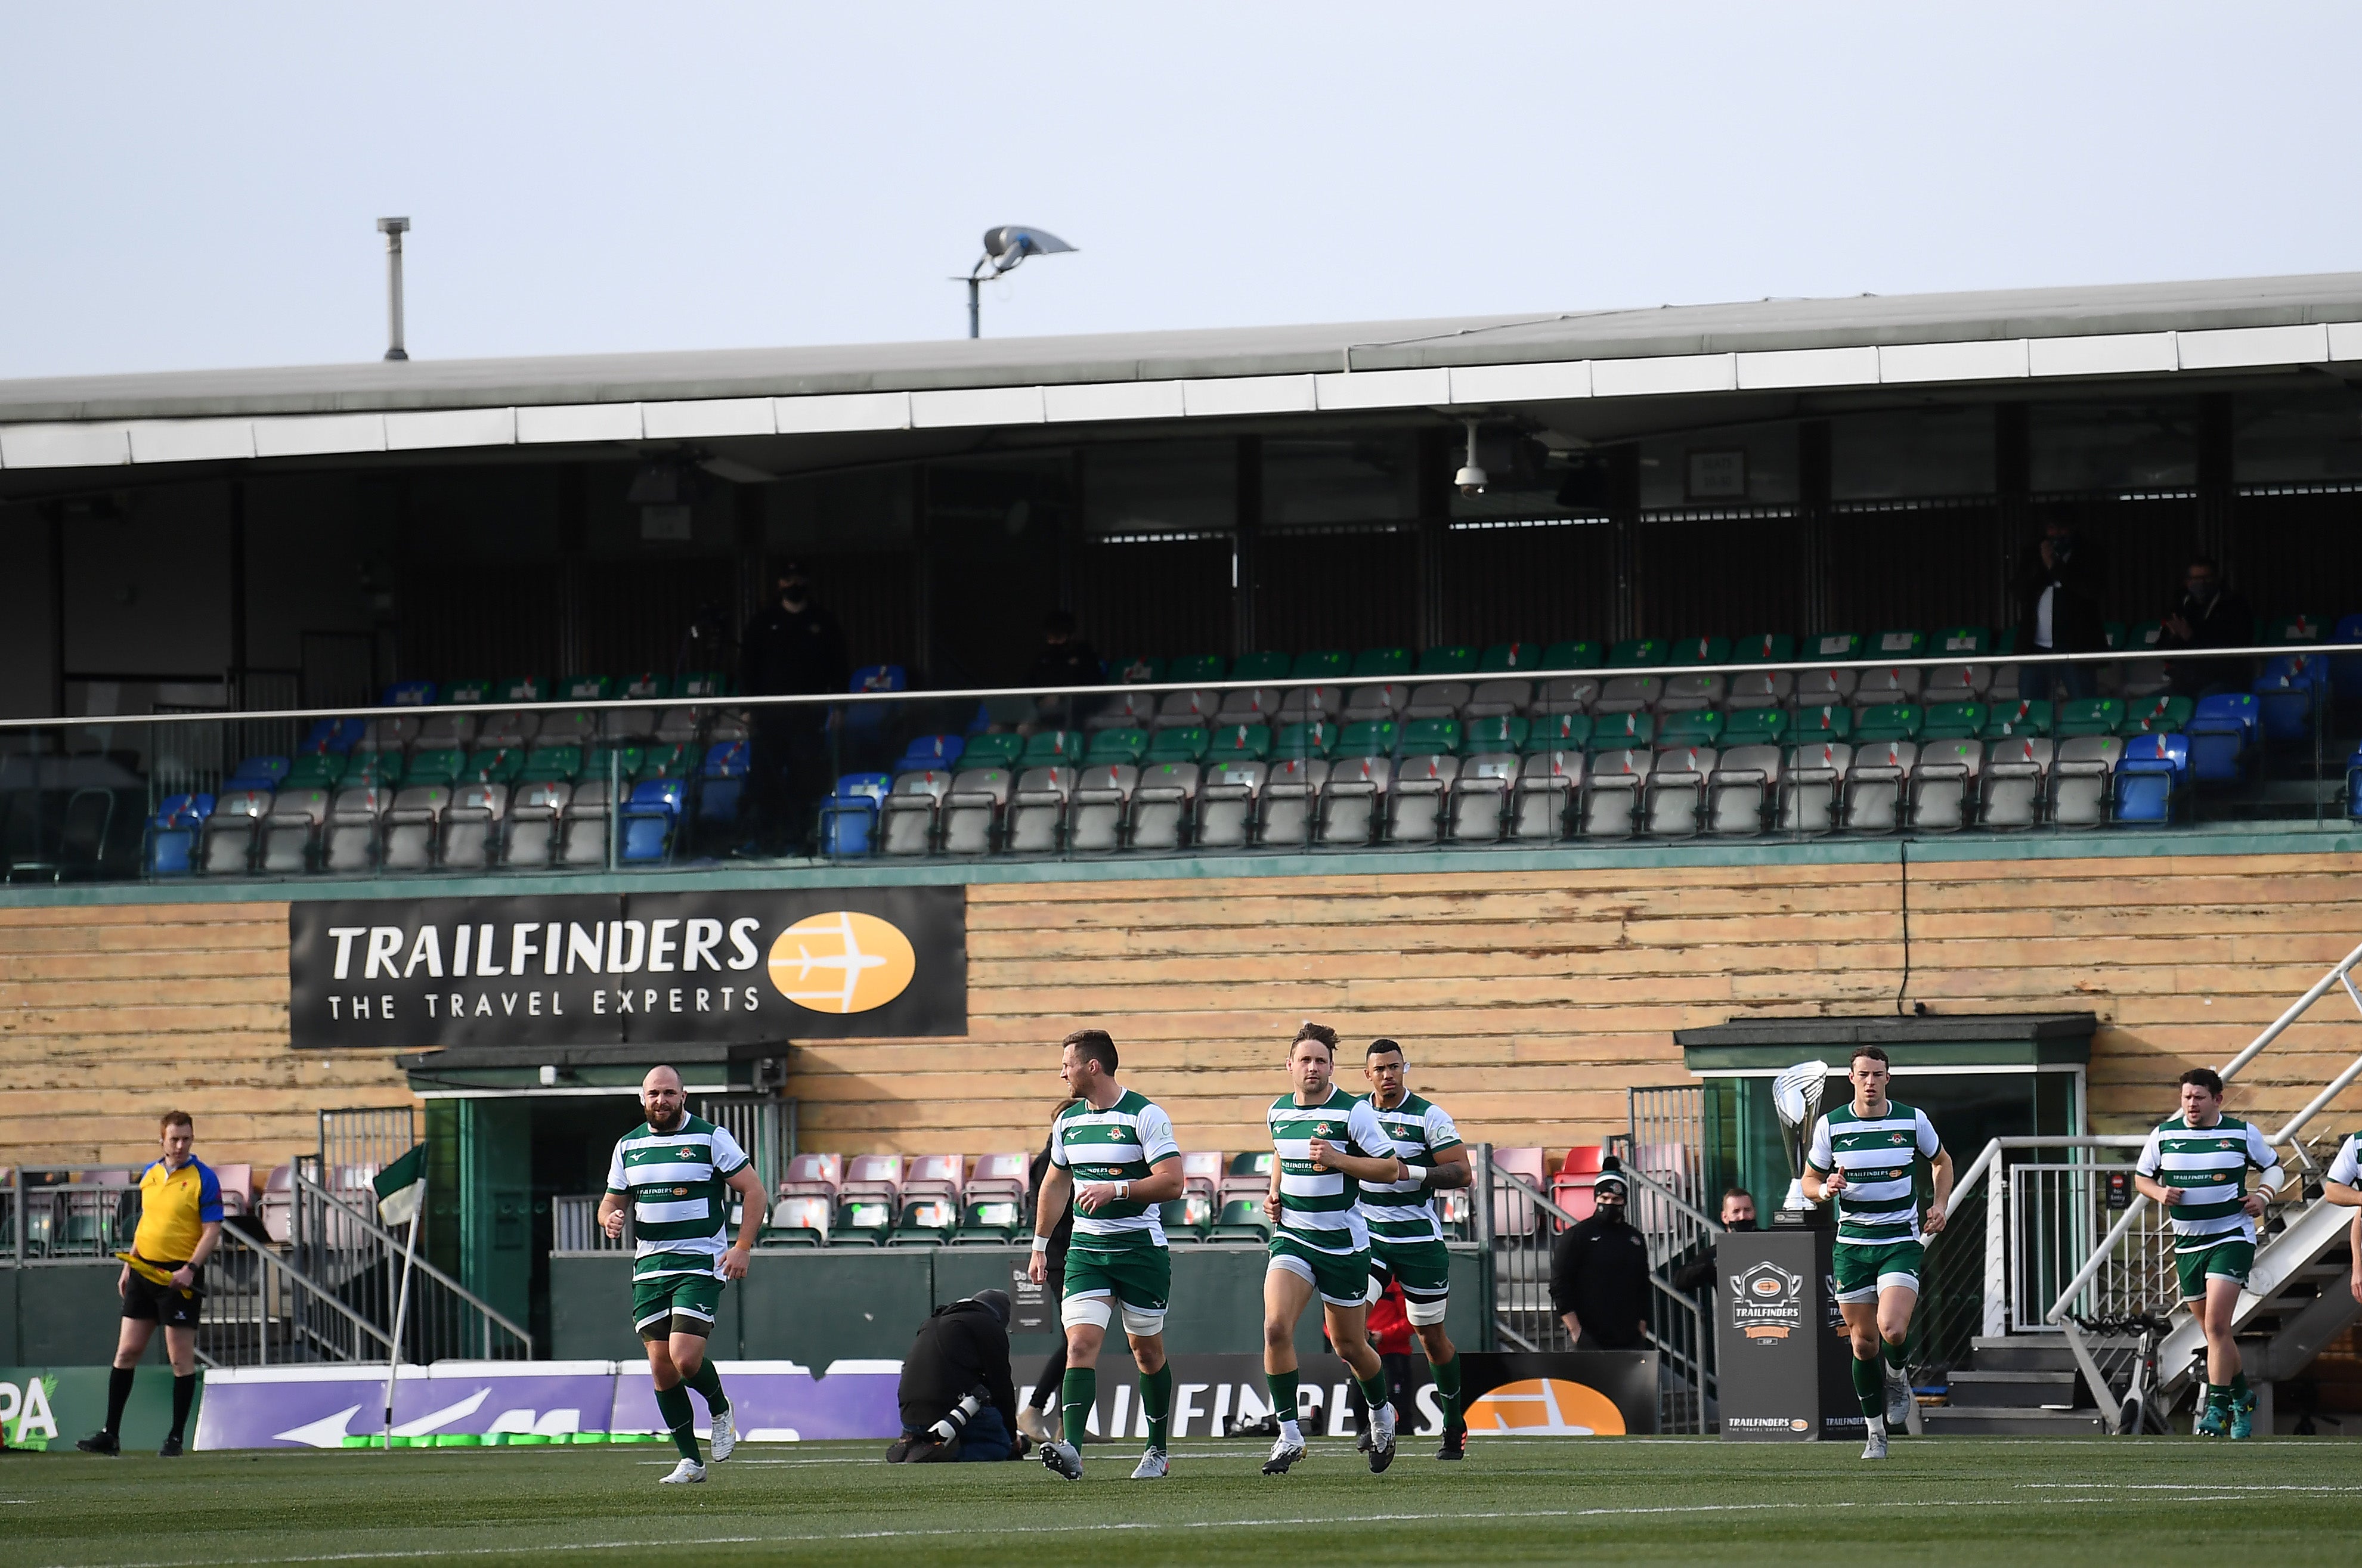 It was determined that Ealing Trailfinders’ ground didn’t meet the minimum standards criteria for promotion